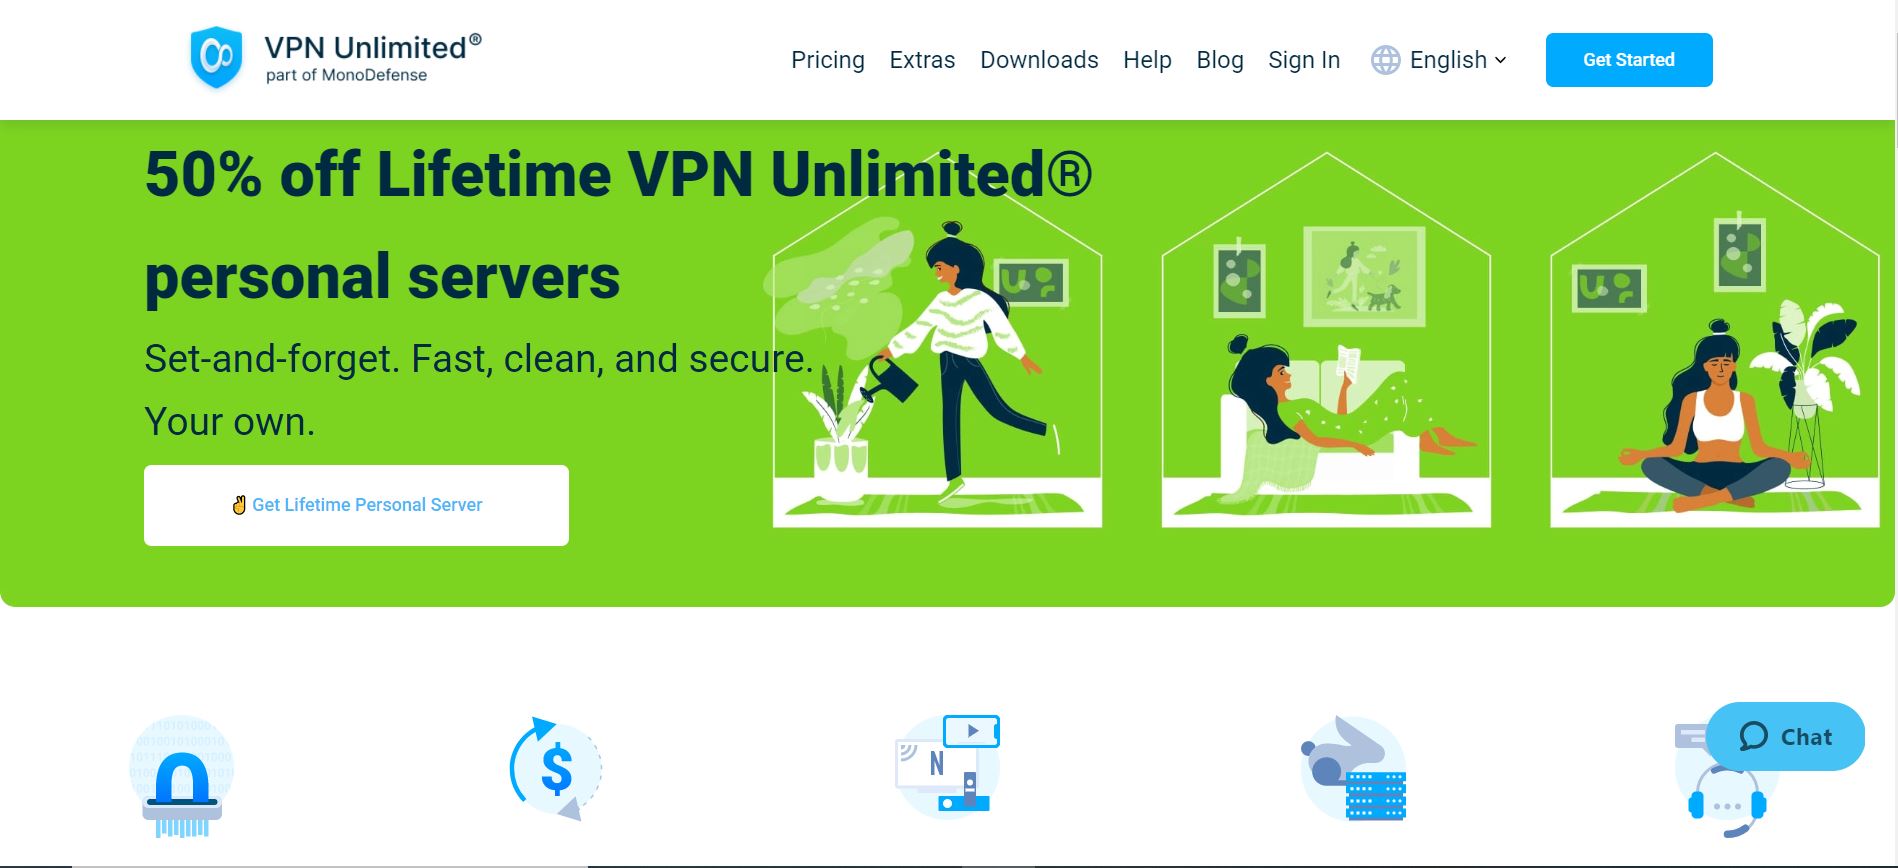 Find pricing, reviews and other details about KeepSolid VPN Unlimited